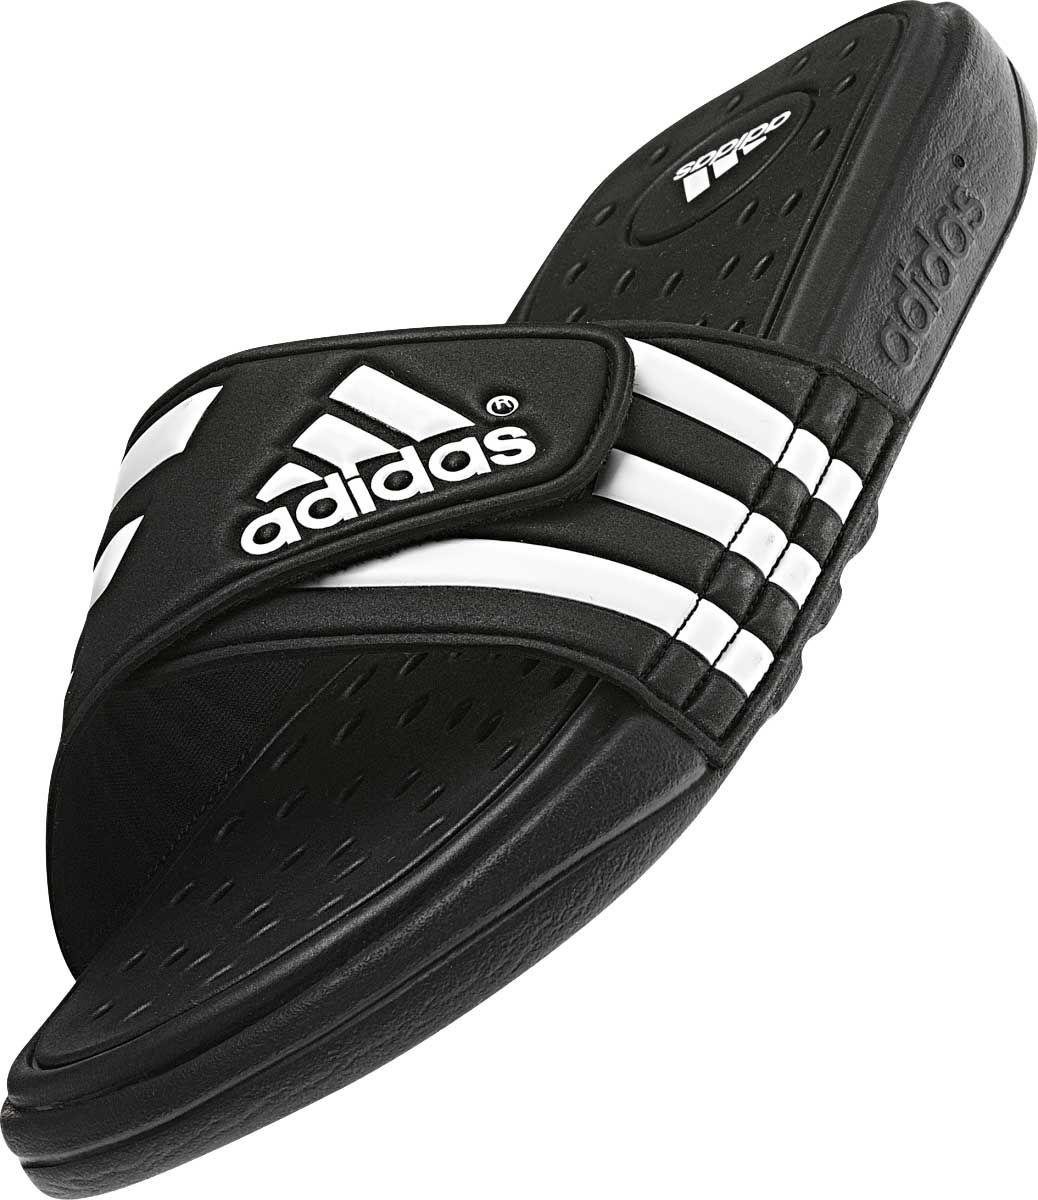 adidas Synthetic Adissage Supercloud Slides in Black/White (Black) for Men  | Lyst